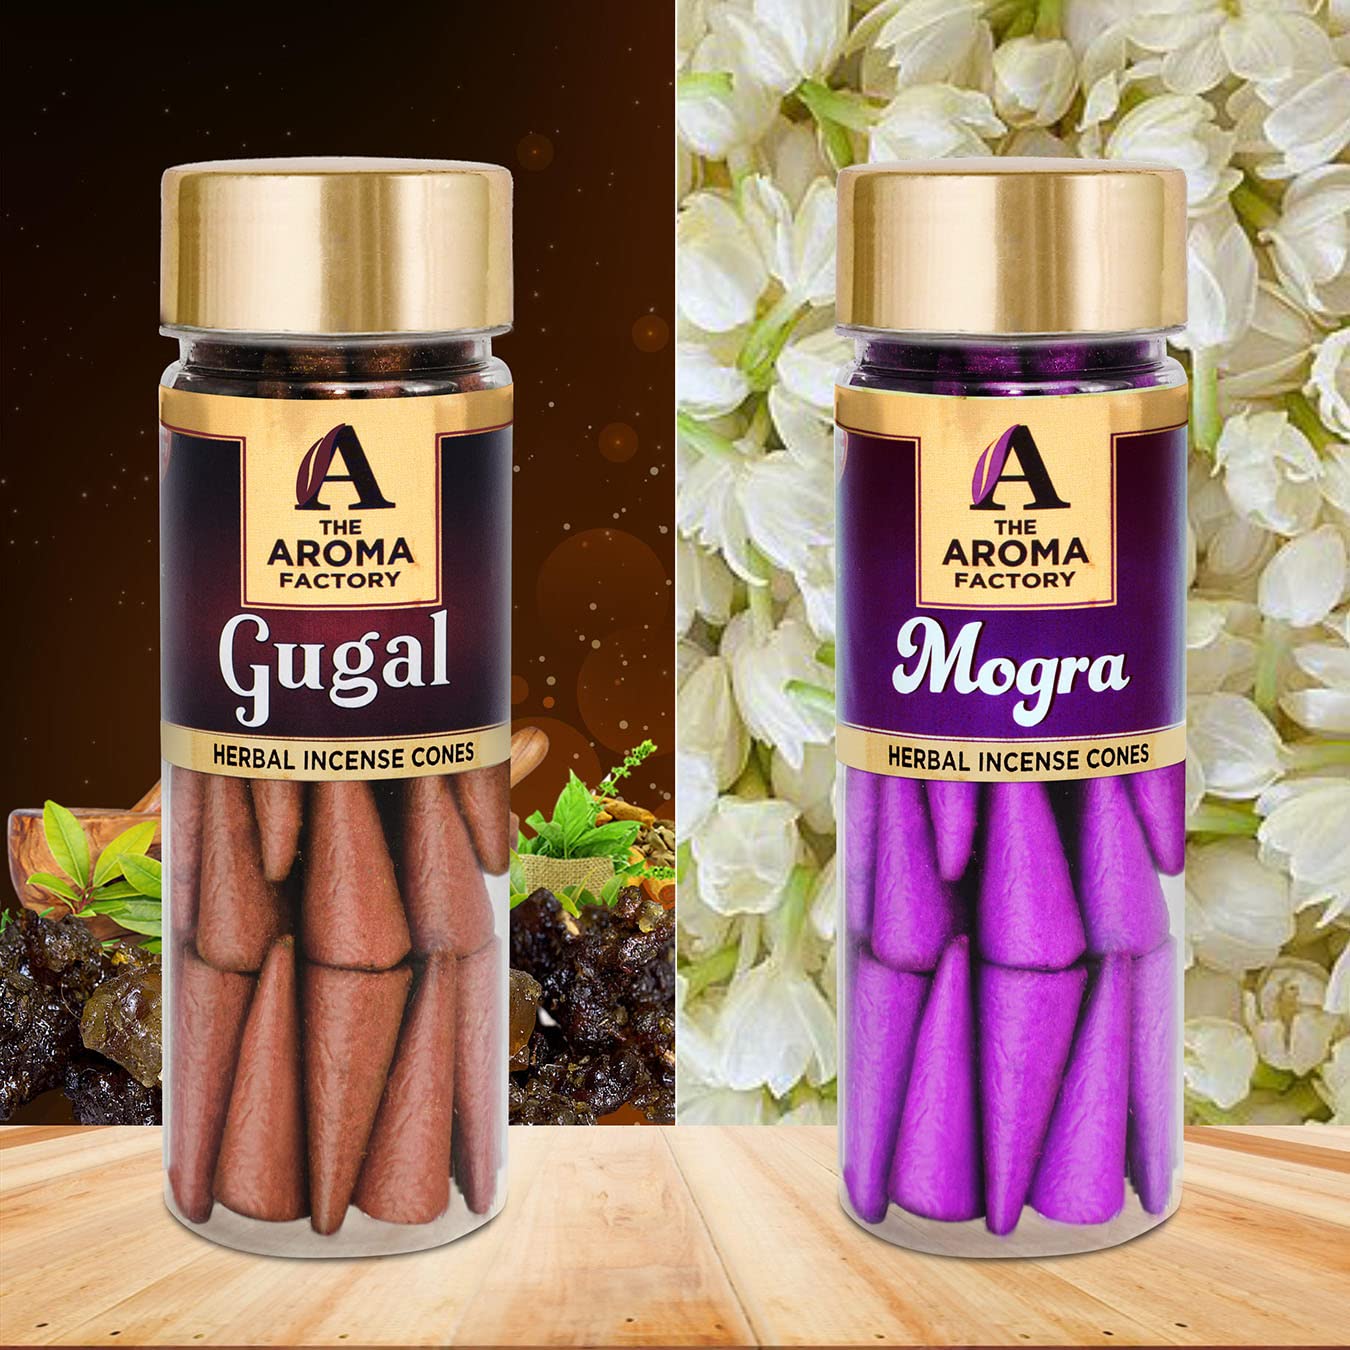 The Aroma Factory Incense Dhoop Cone for Pooja, Gugal & Mogra (100% Herbal & 0% Charcoal) 2 Bottles x 30 Cones